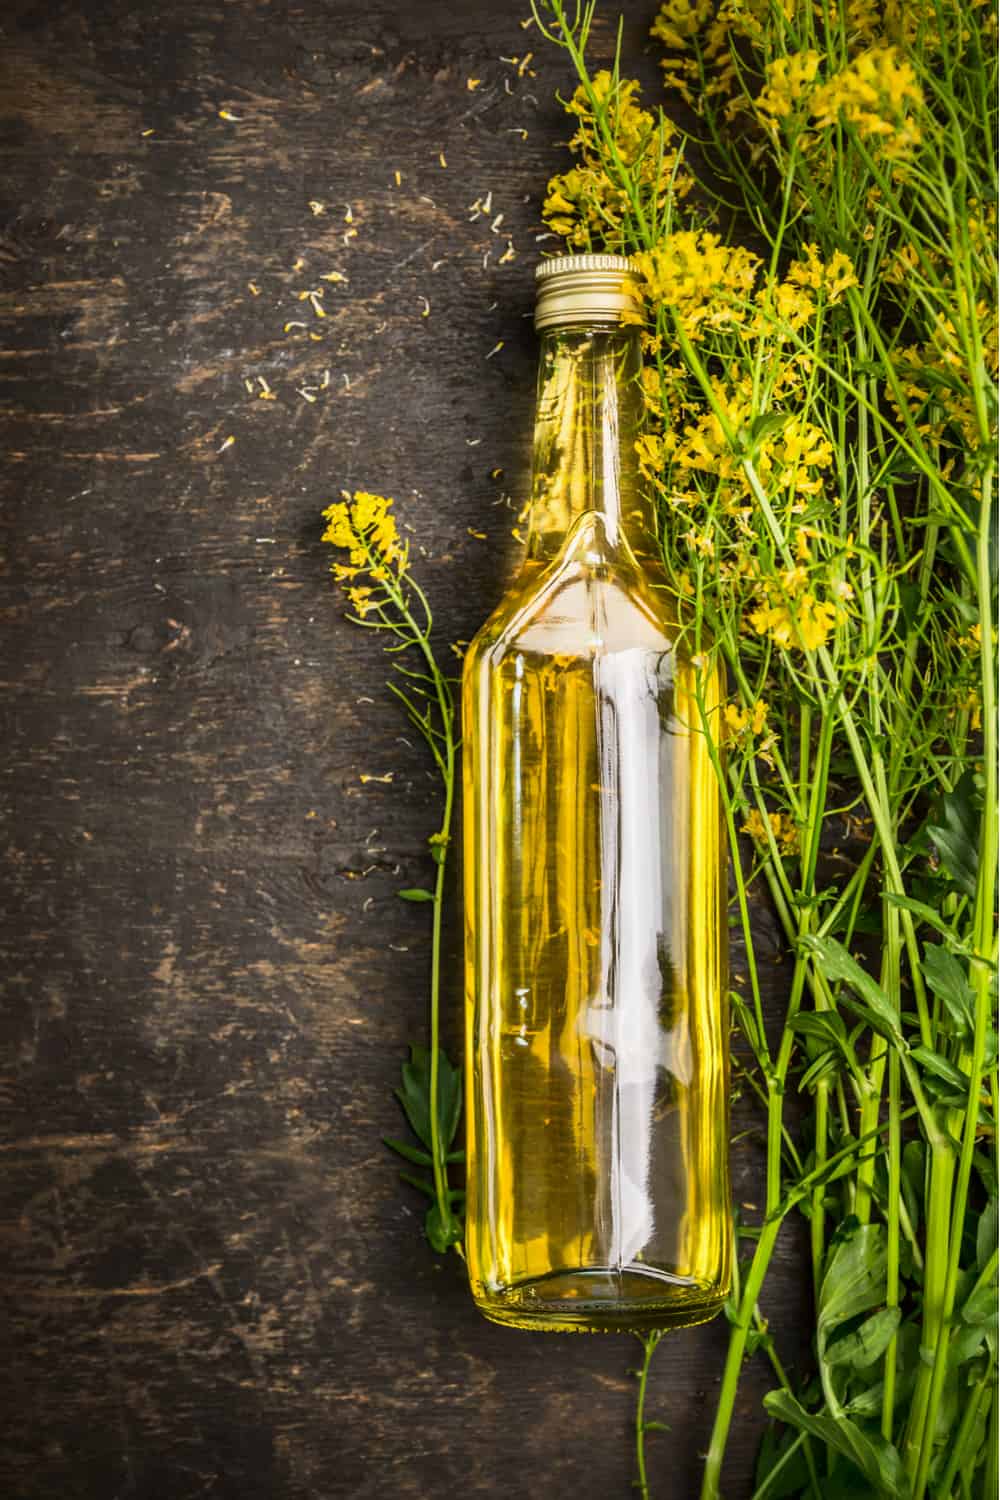 How to Tell if Canola Oil has Gone Bad